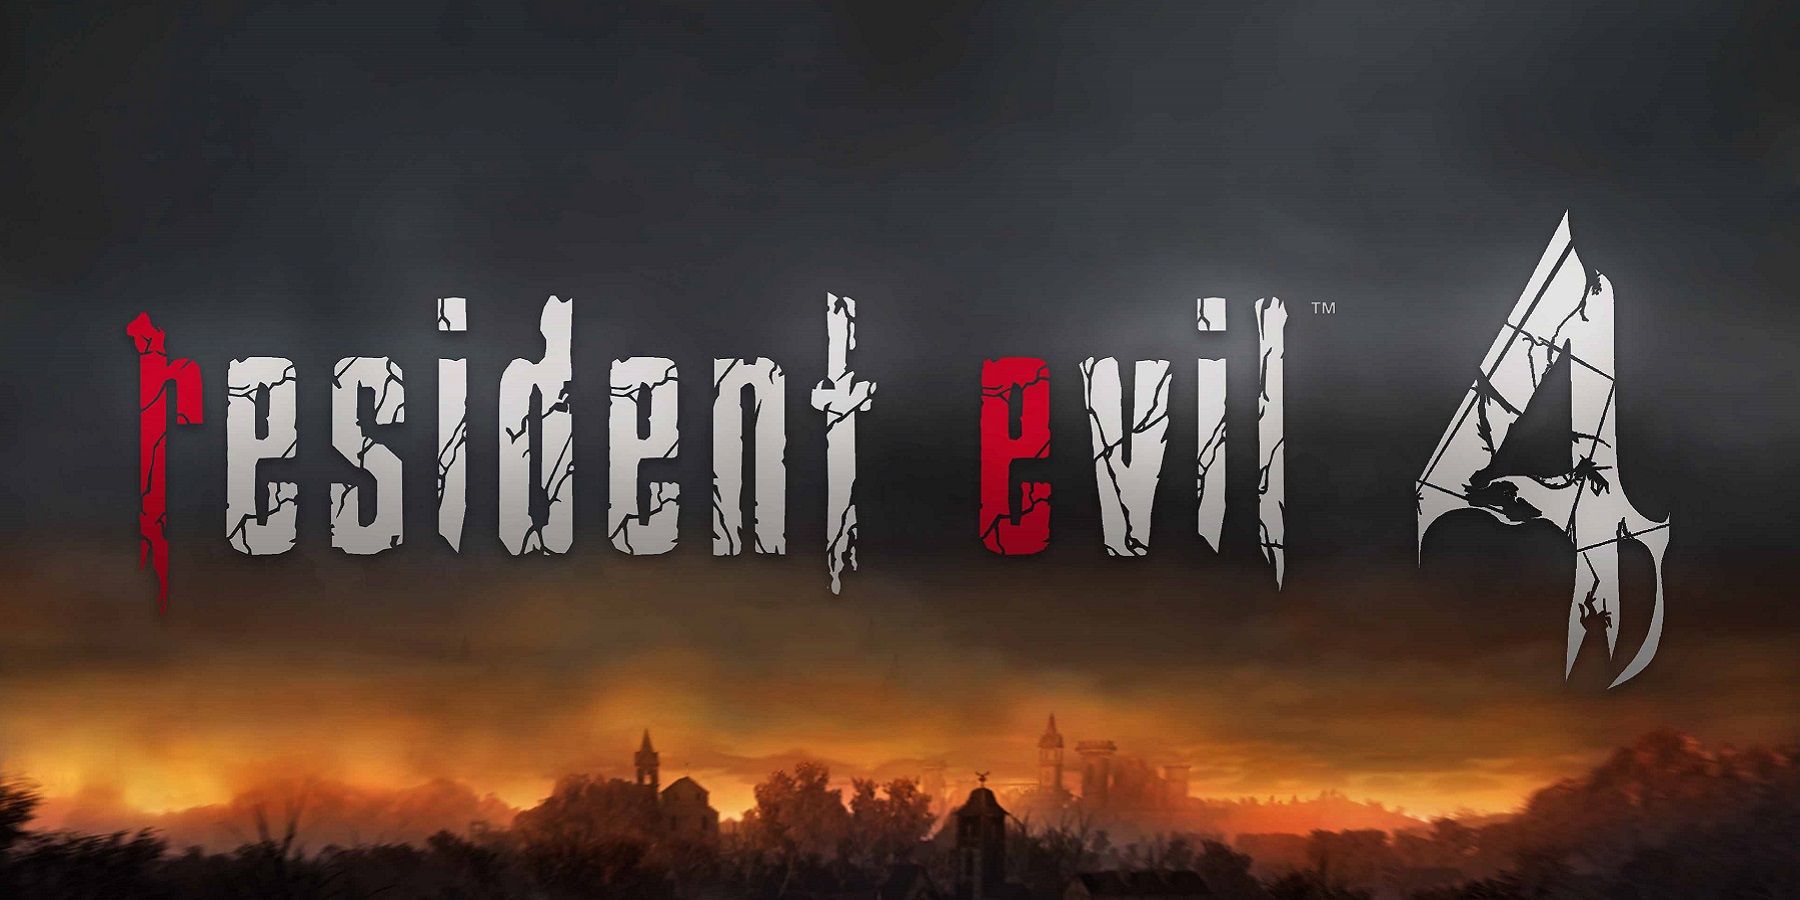 The Resident Evil 4 logo with the village in the background.